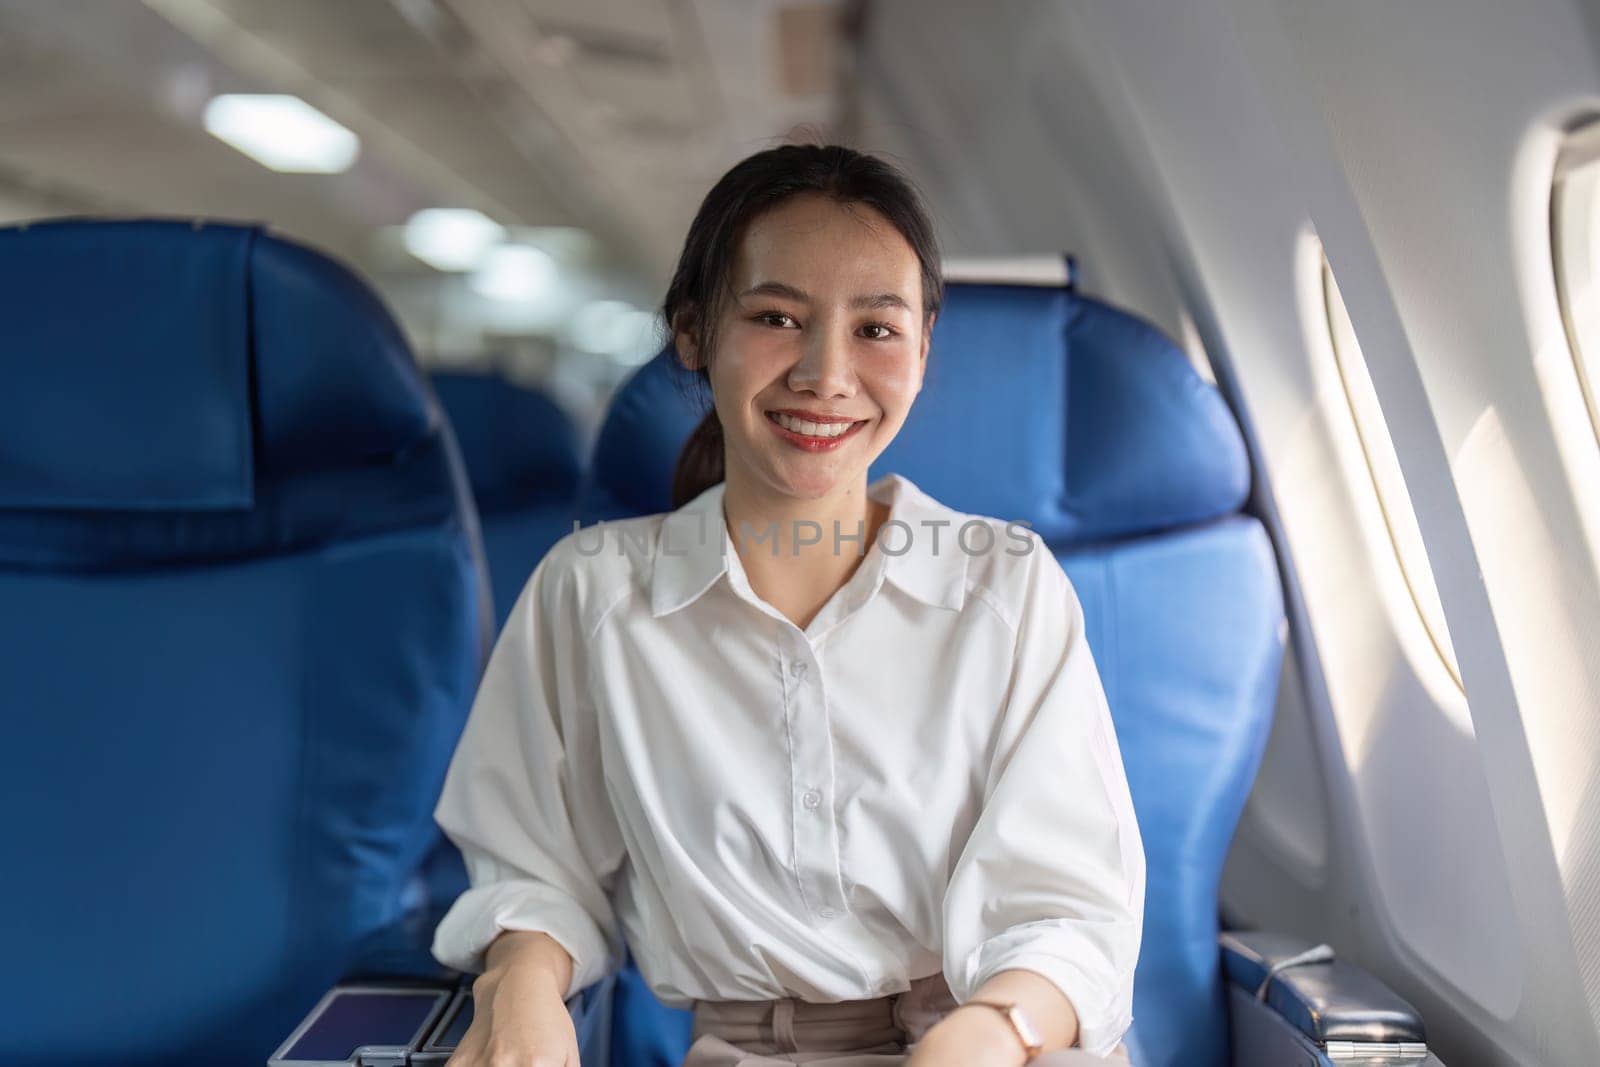 A woman is sitting on a blue airplane seat with a smile on her face. She is wearing a white shirt and a ponytail